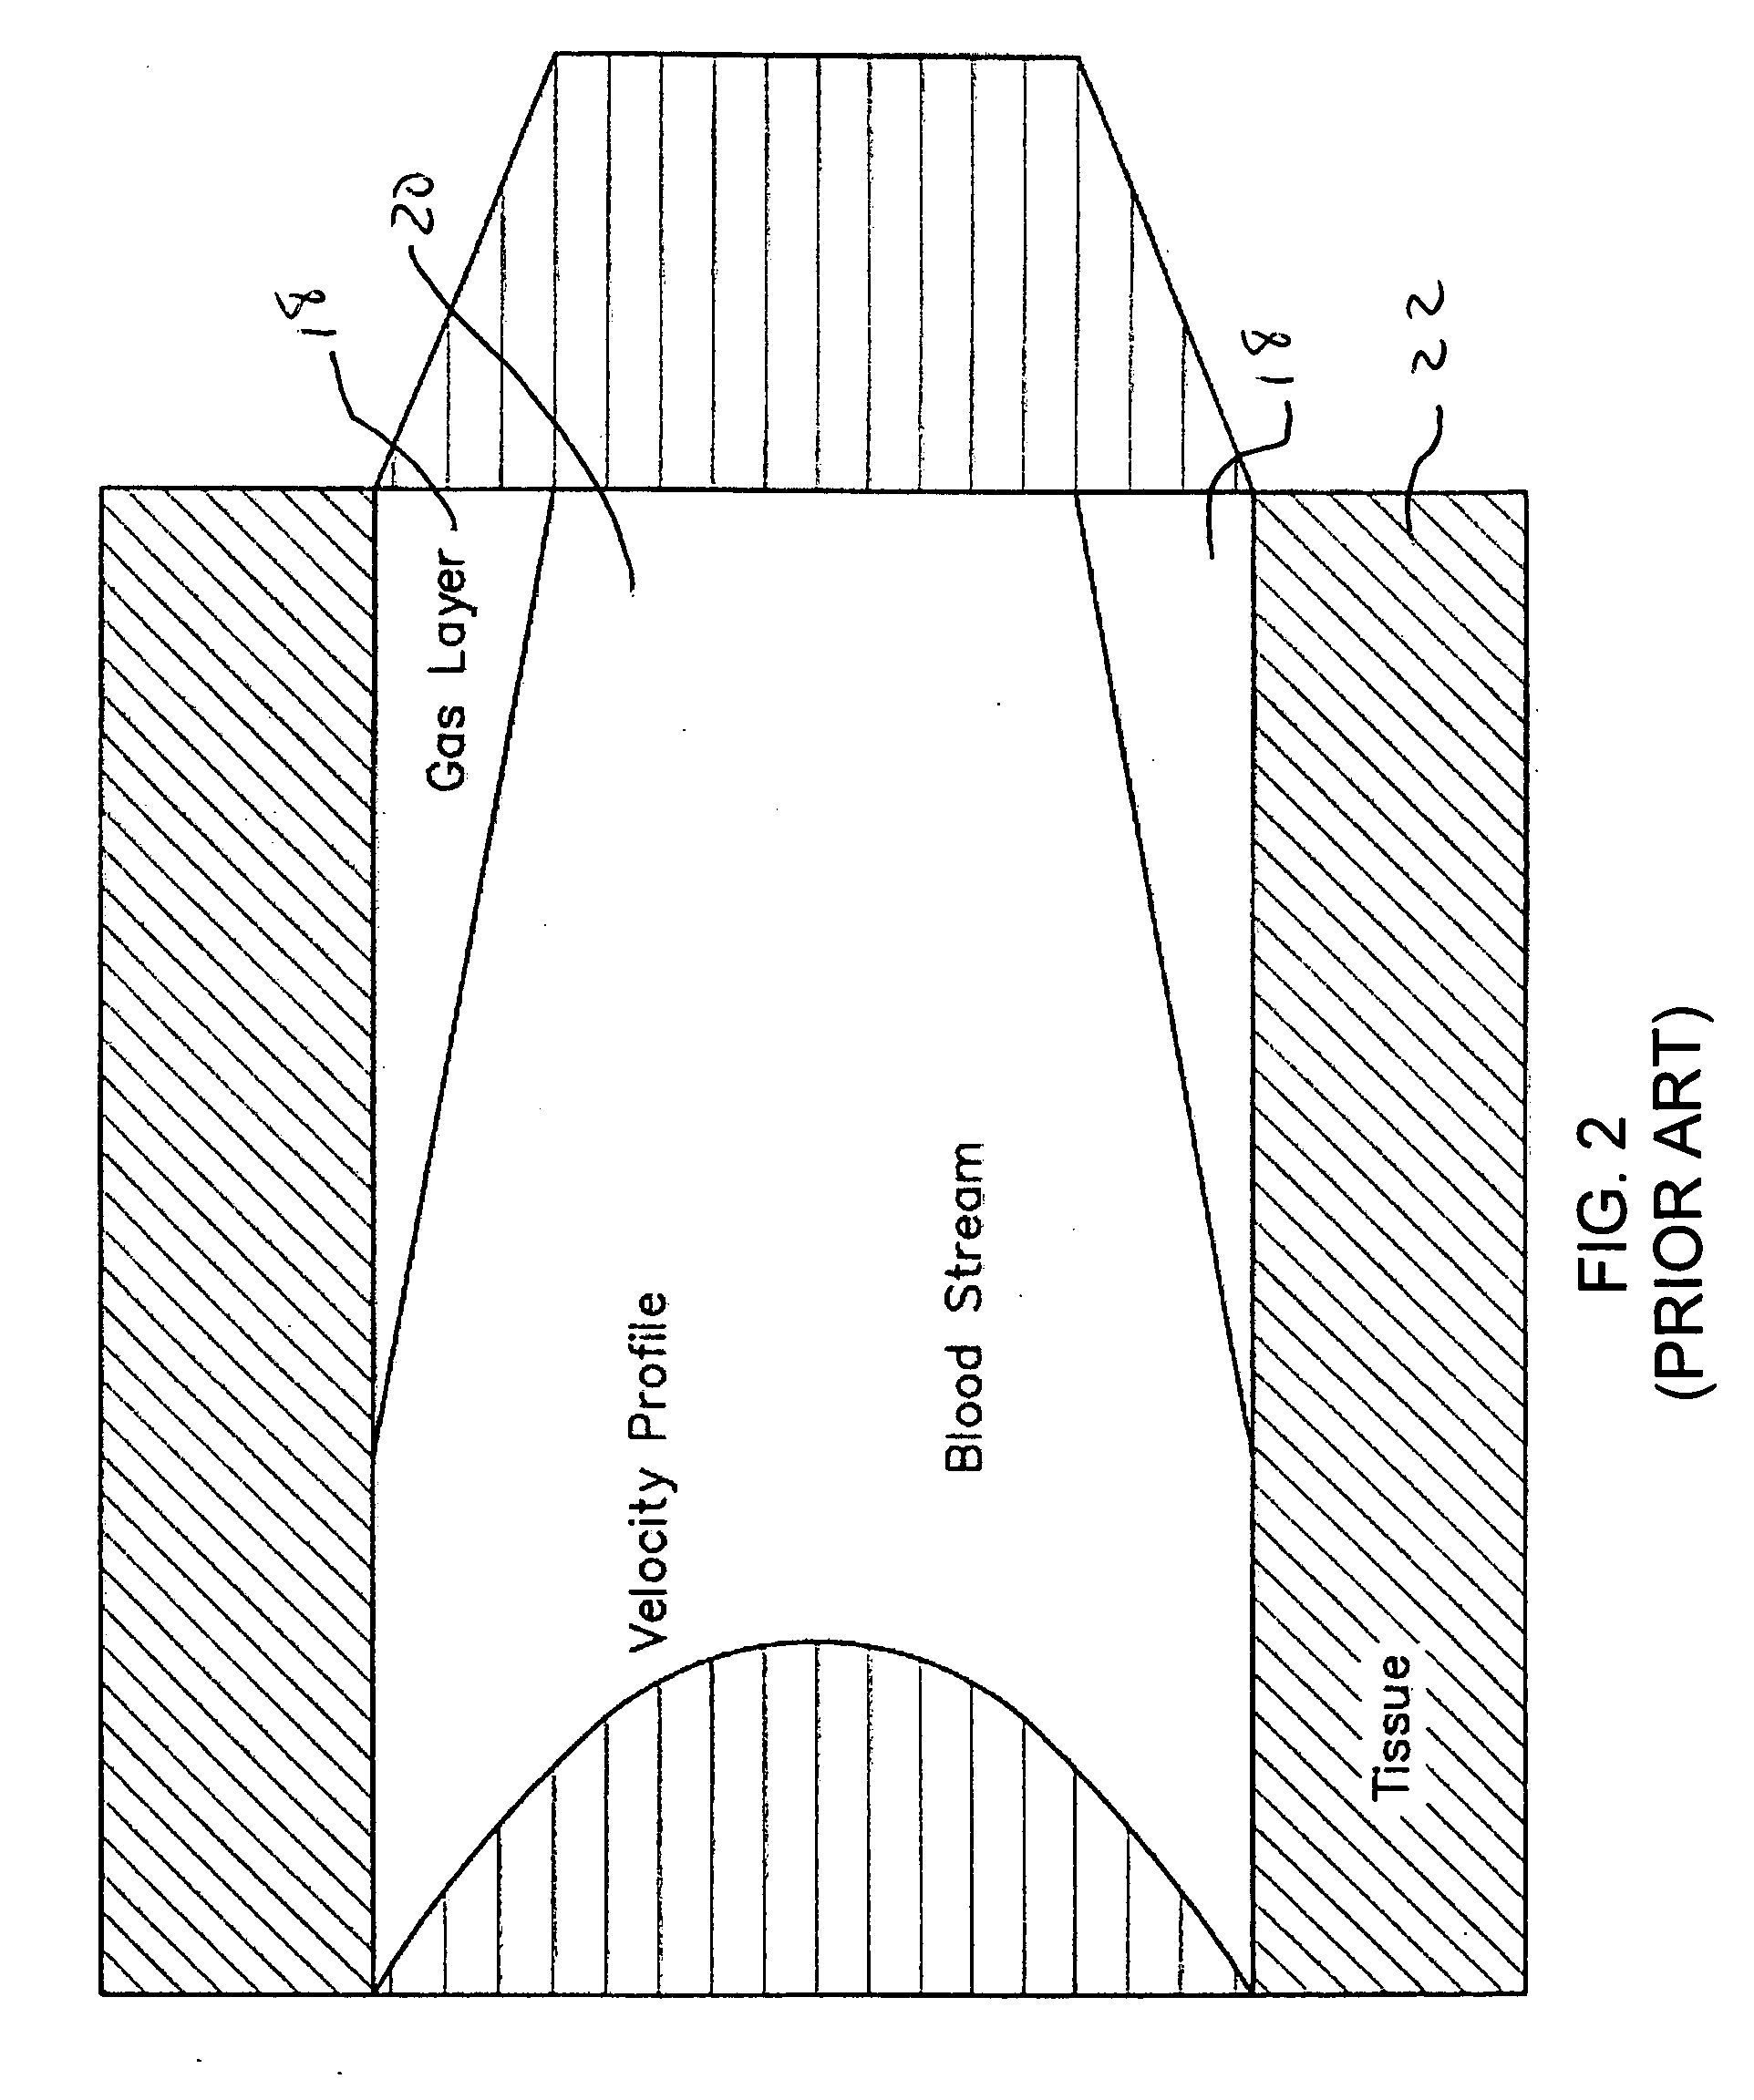 Dive computer and method for determining gas formation